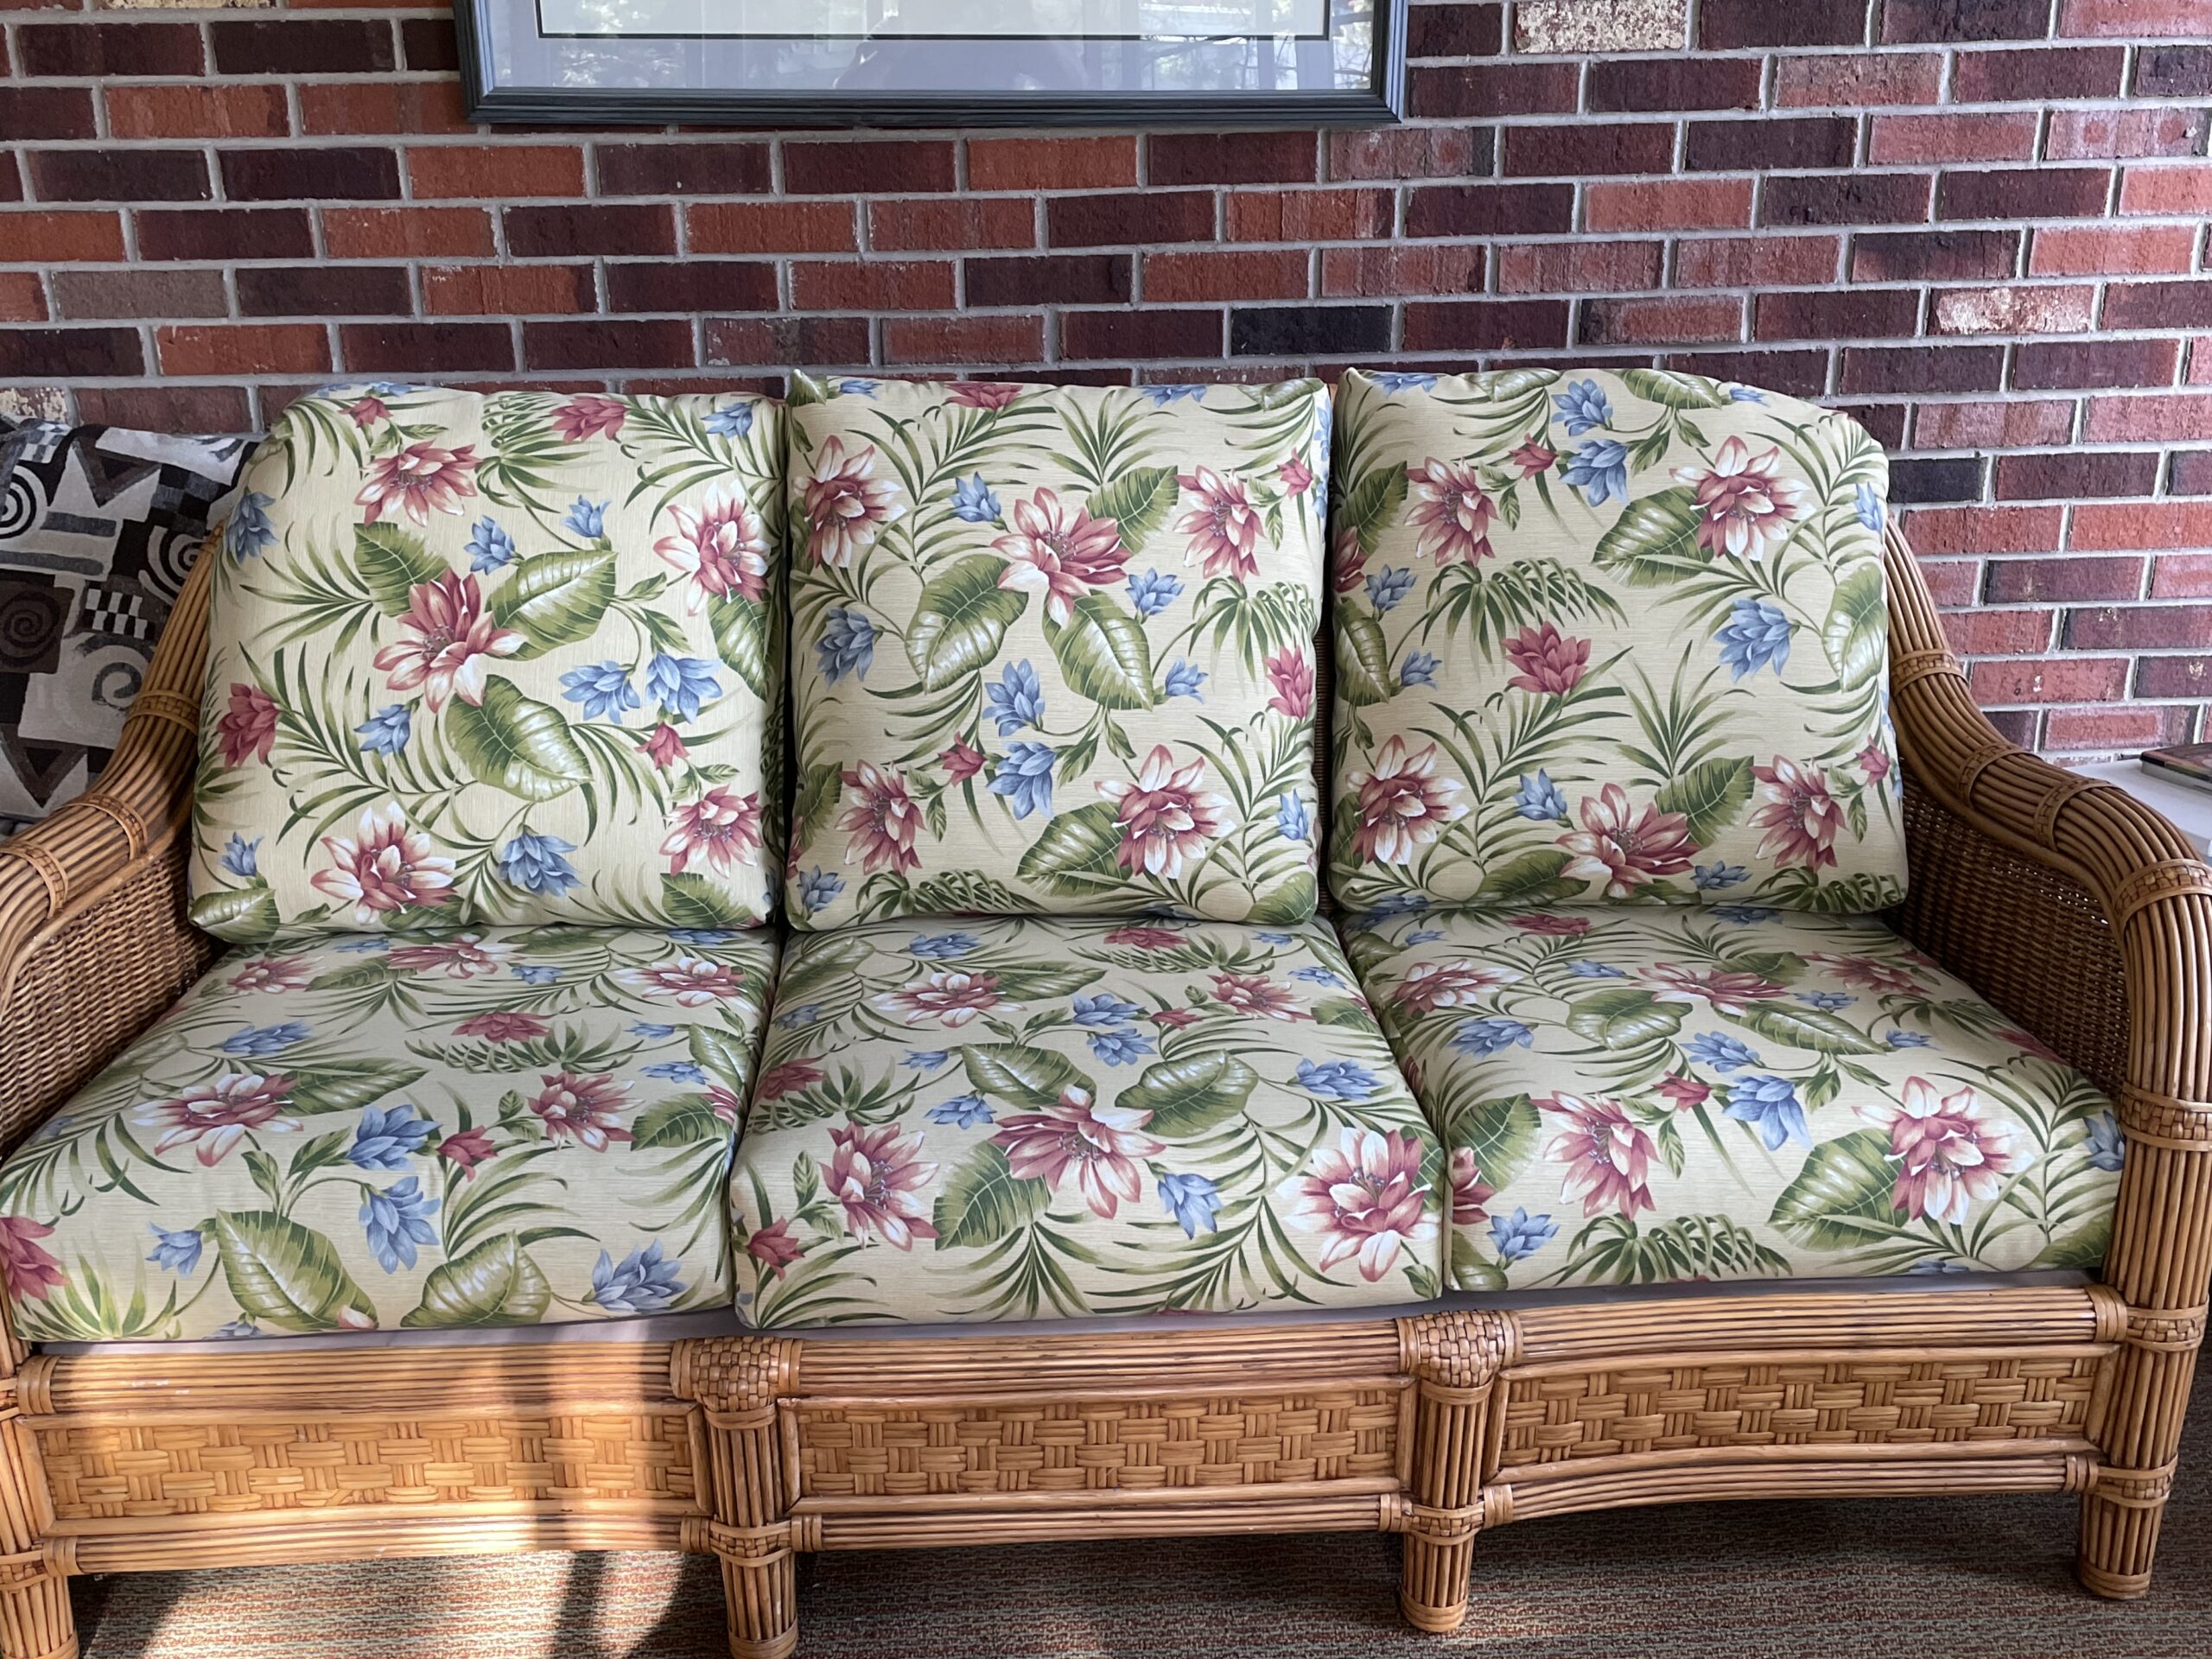 An image of floral cushions on a brown wicker outdoor loveseat.